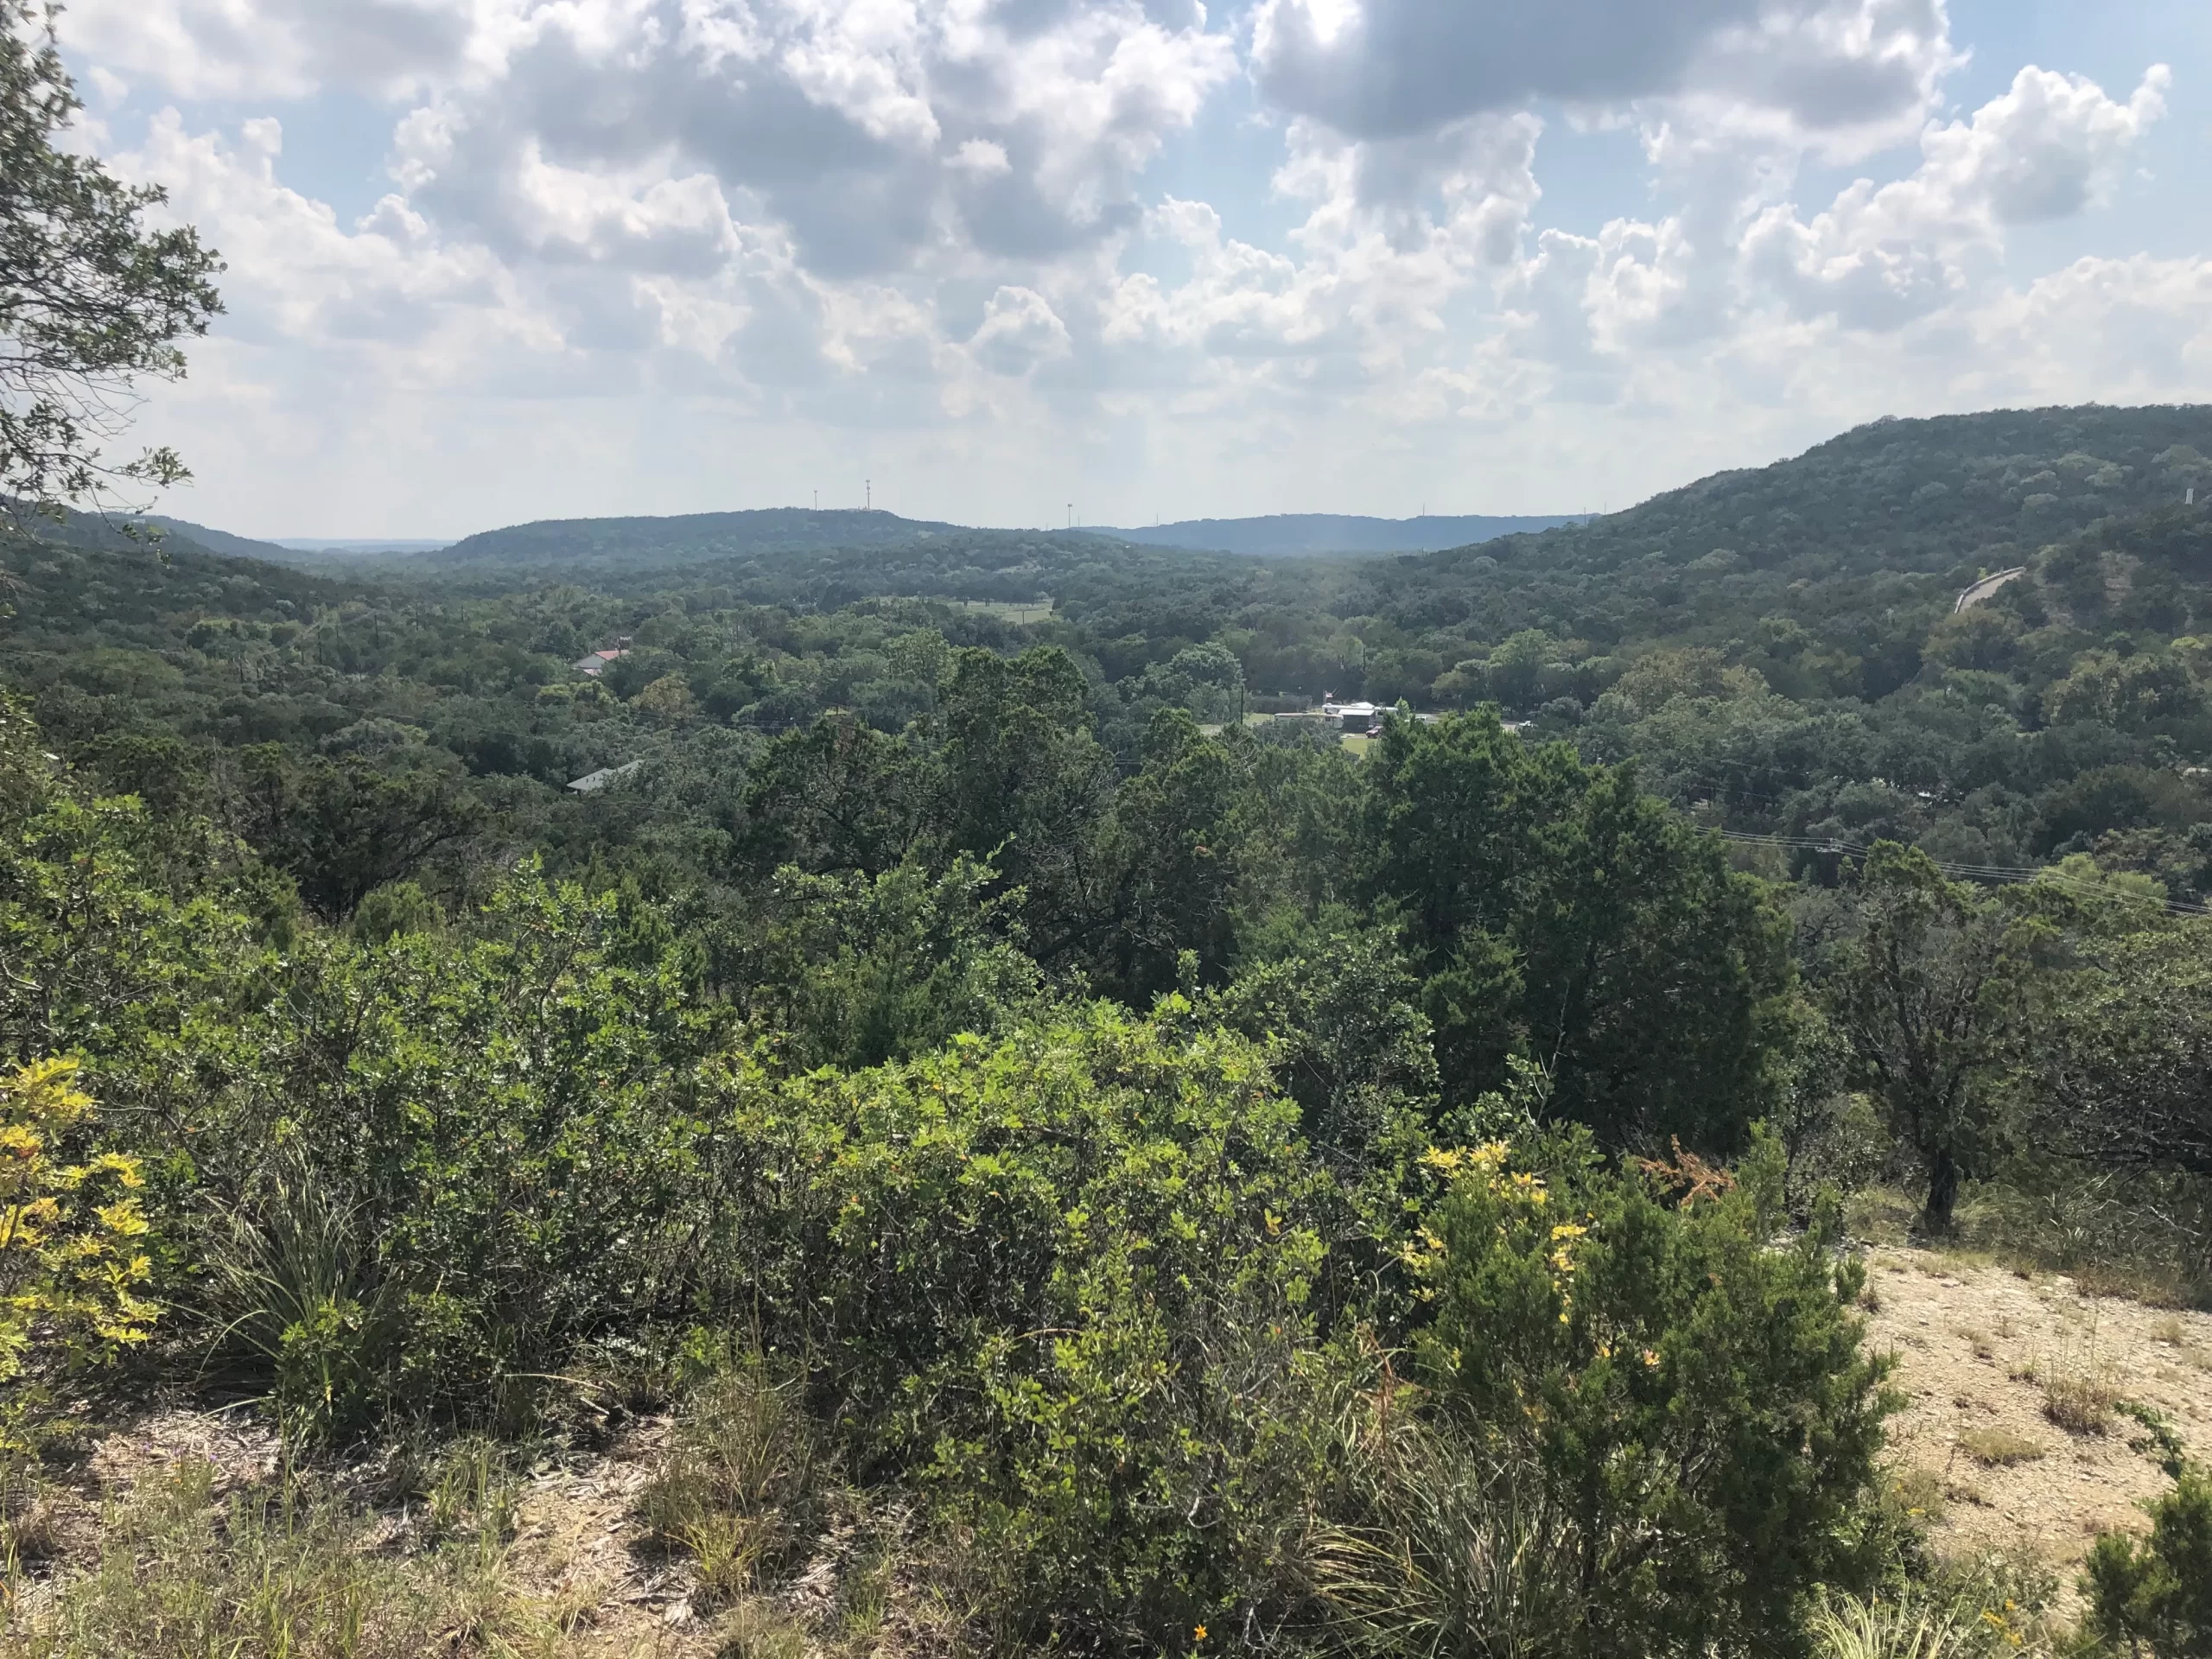 Helotes Canyon Watershed’s Future At Stake With Guajolote Tract Decision